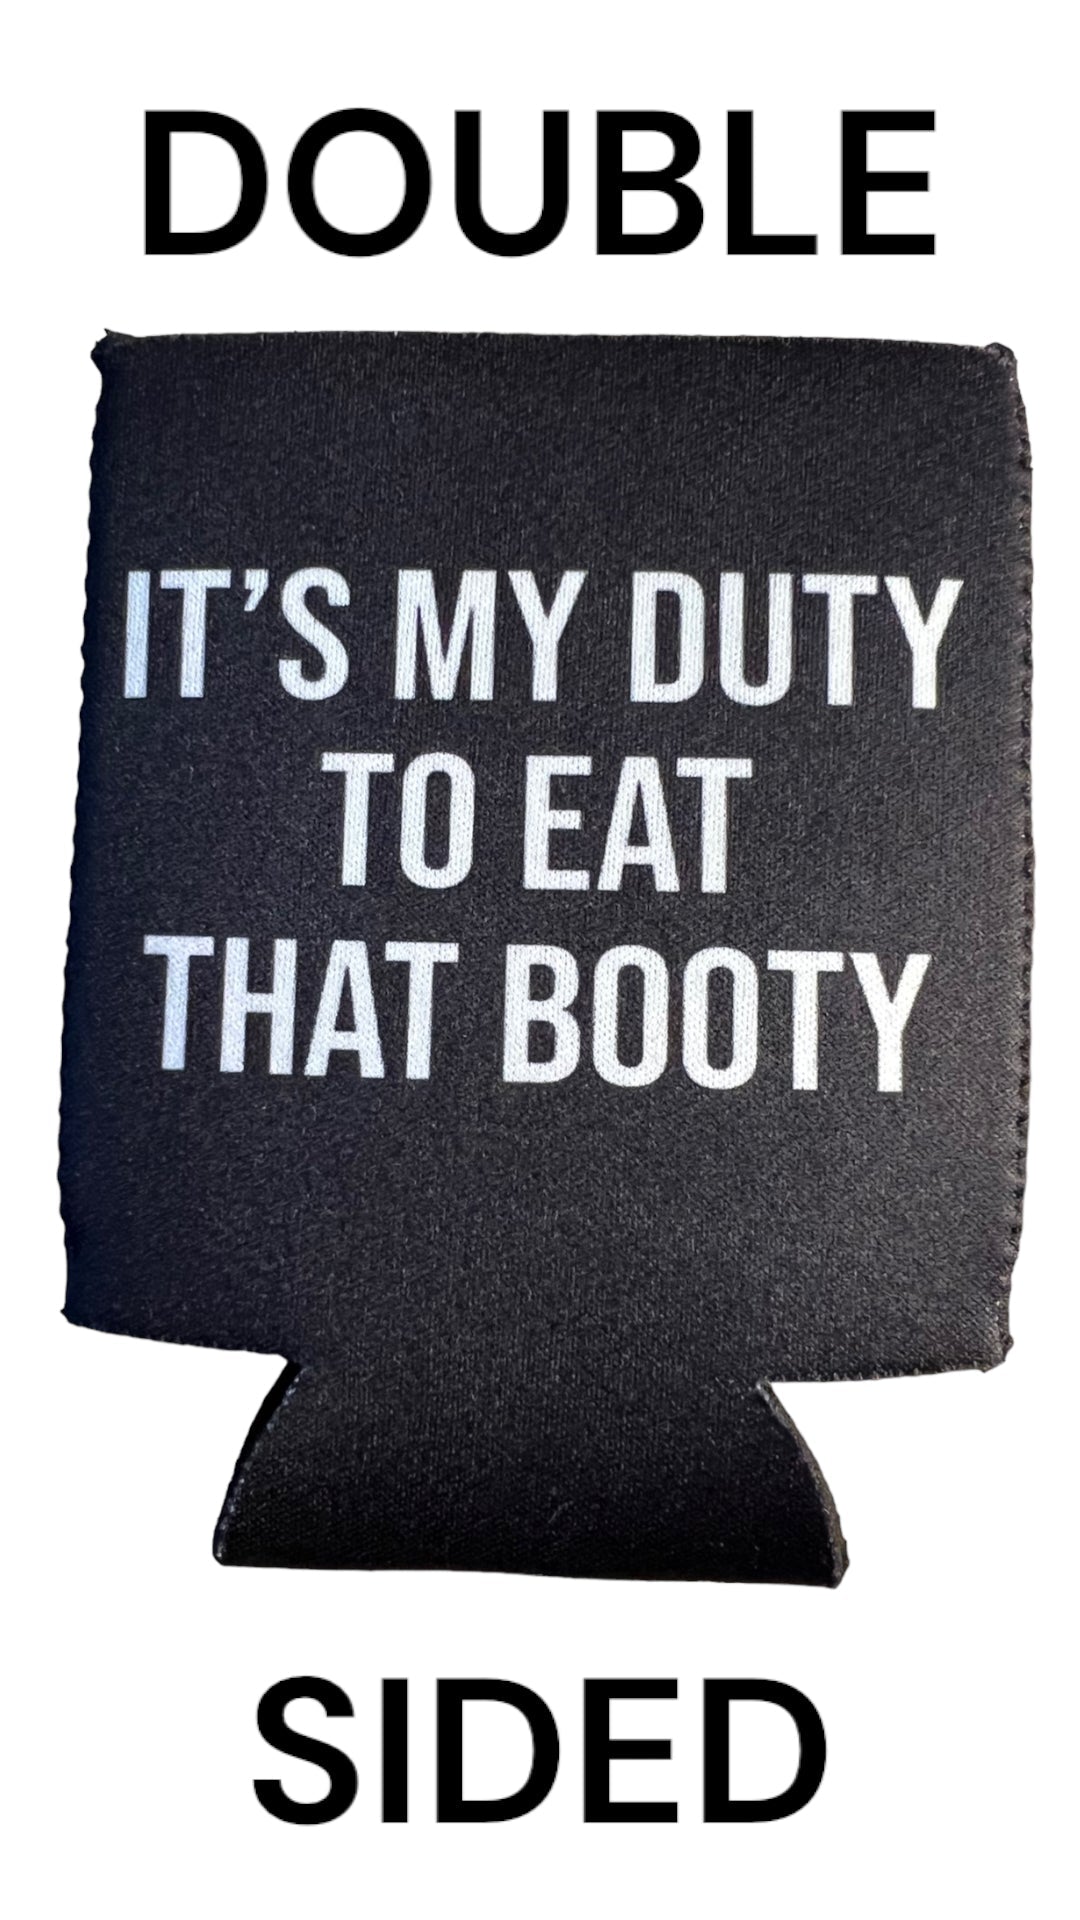 It's My Duty To Eat That Booty Funny Beer Can Cooler Holder Sleeve